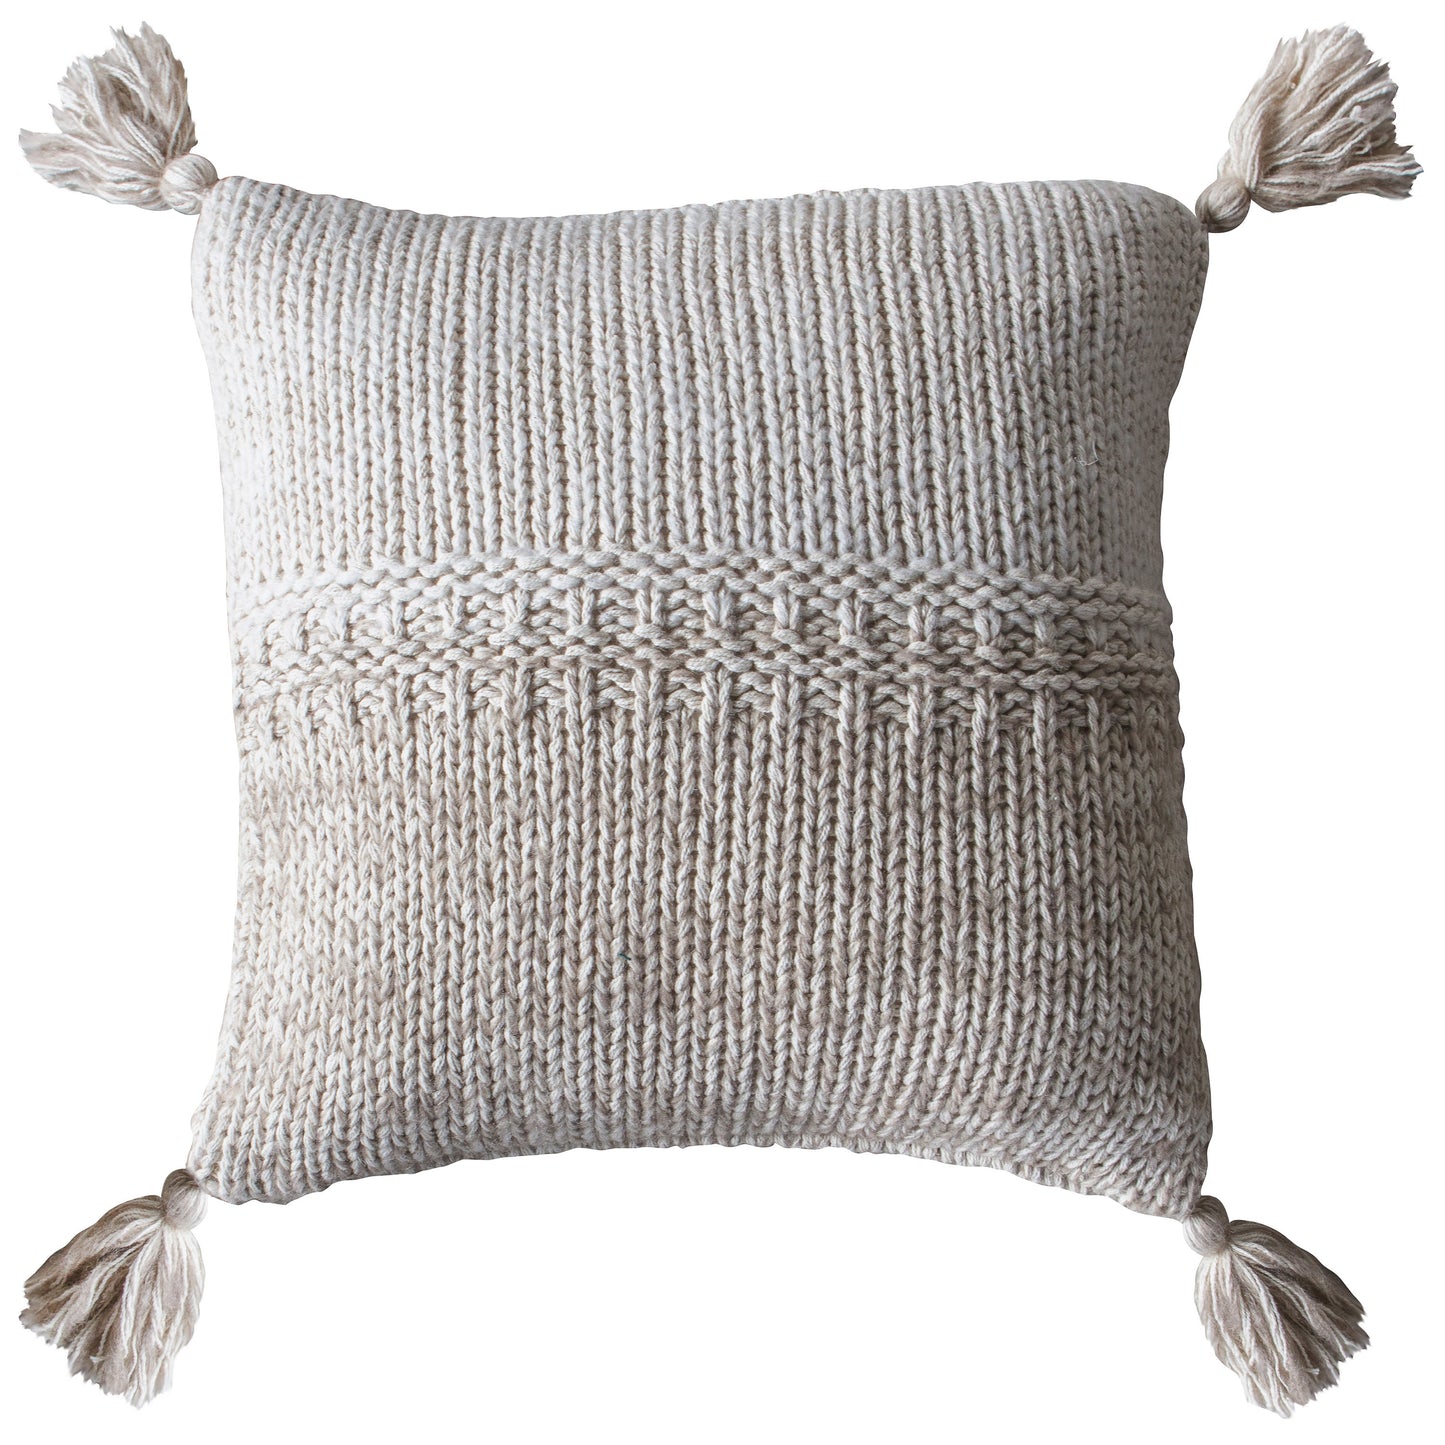 A 2 Tone Knitted Cushion Oatmeal Cream 450x450mm with tassels for interior decor.